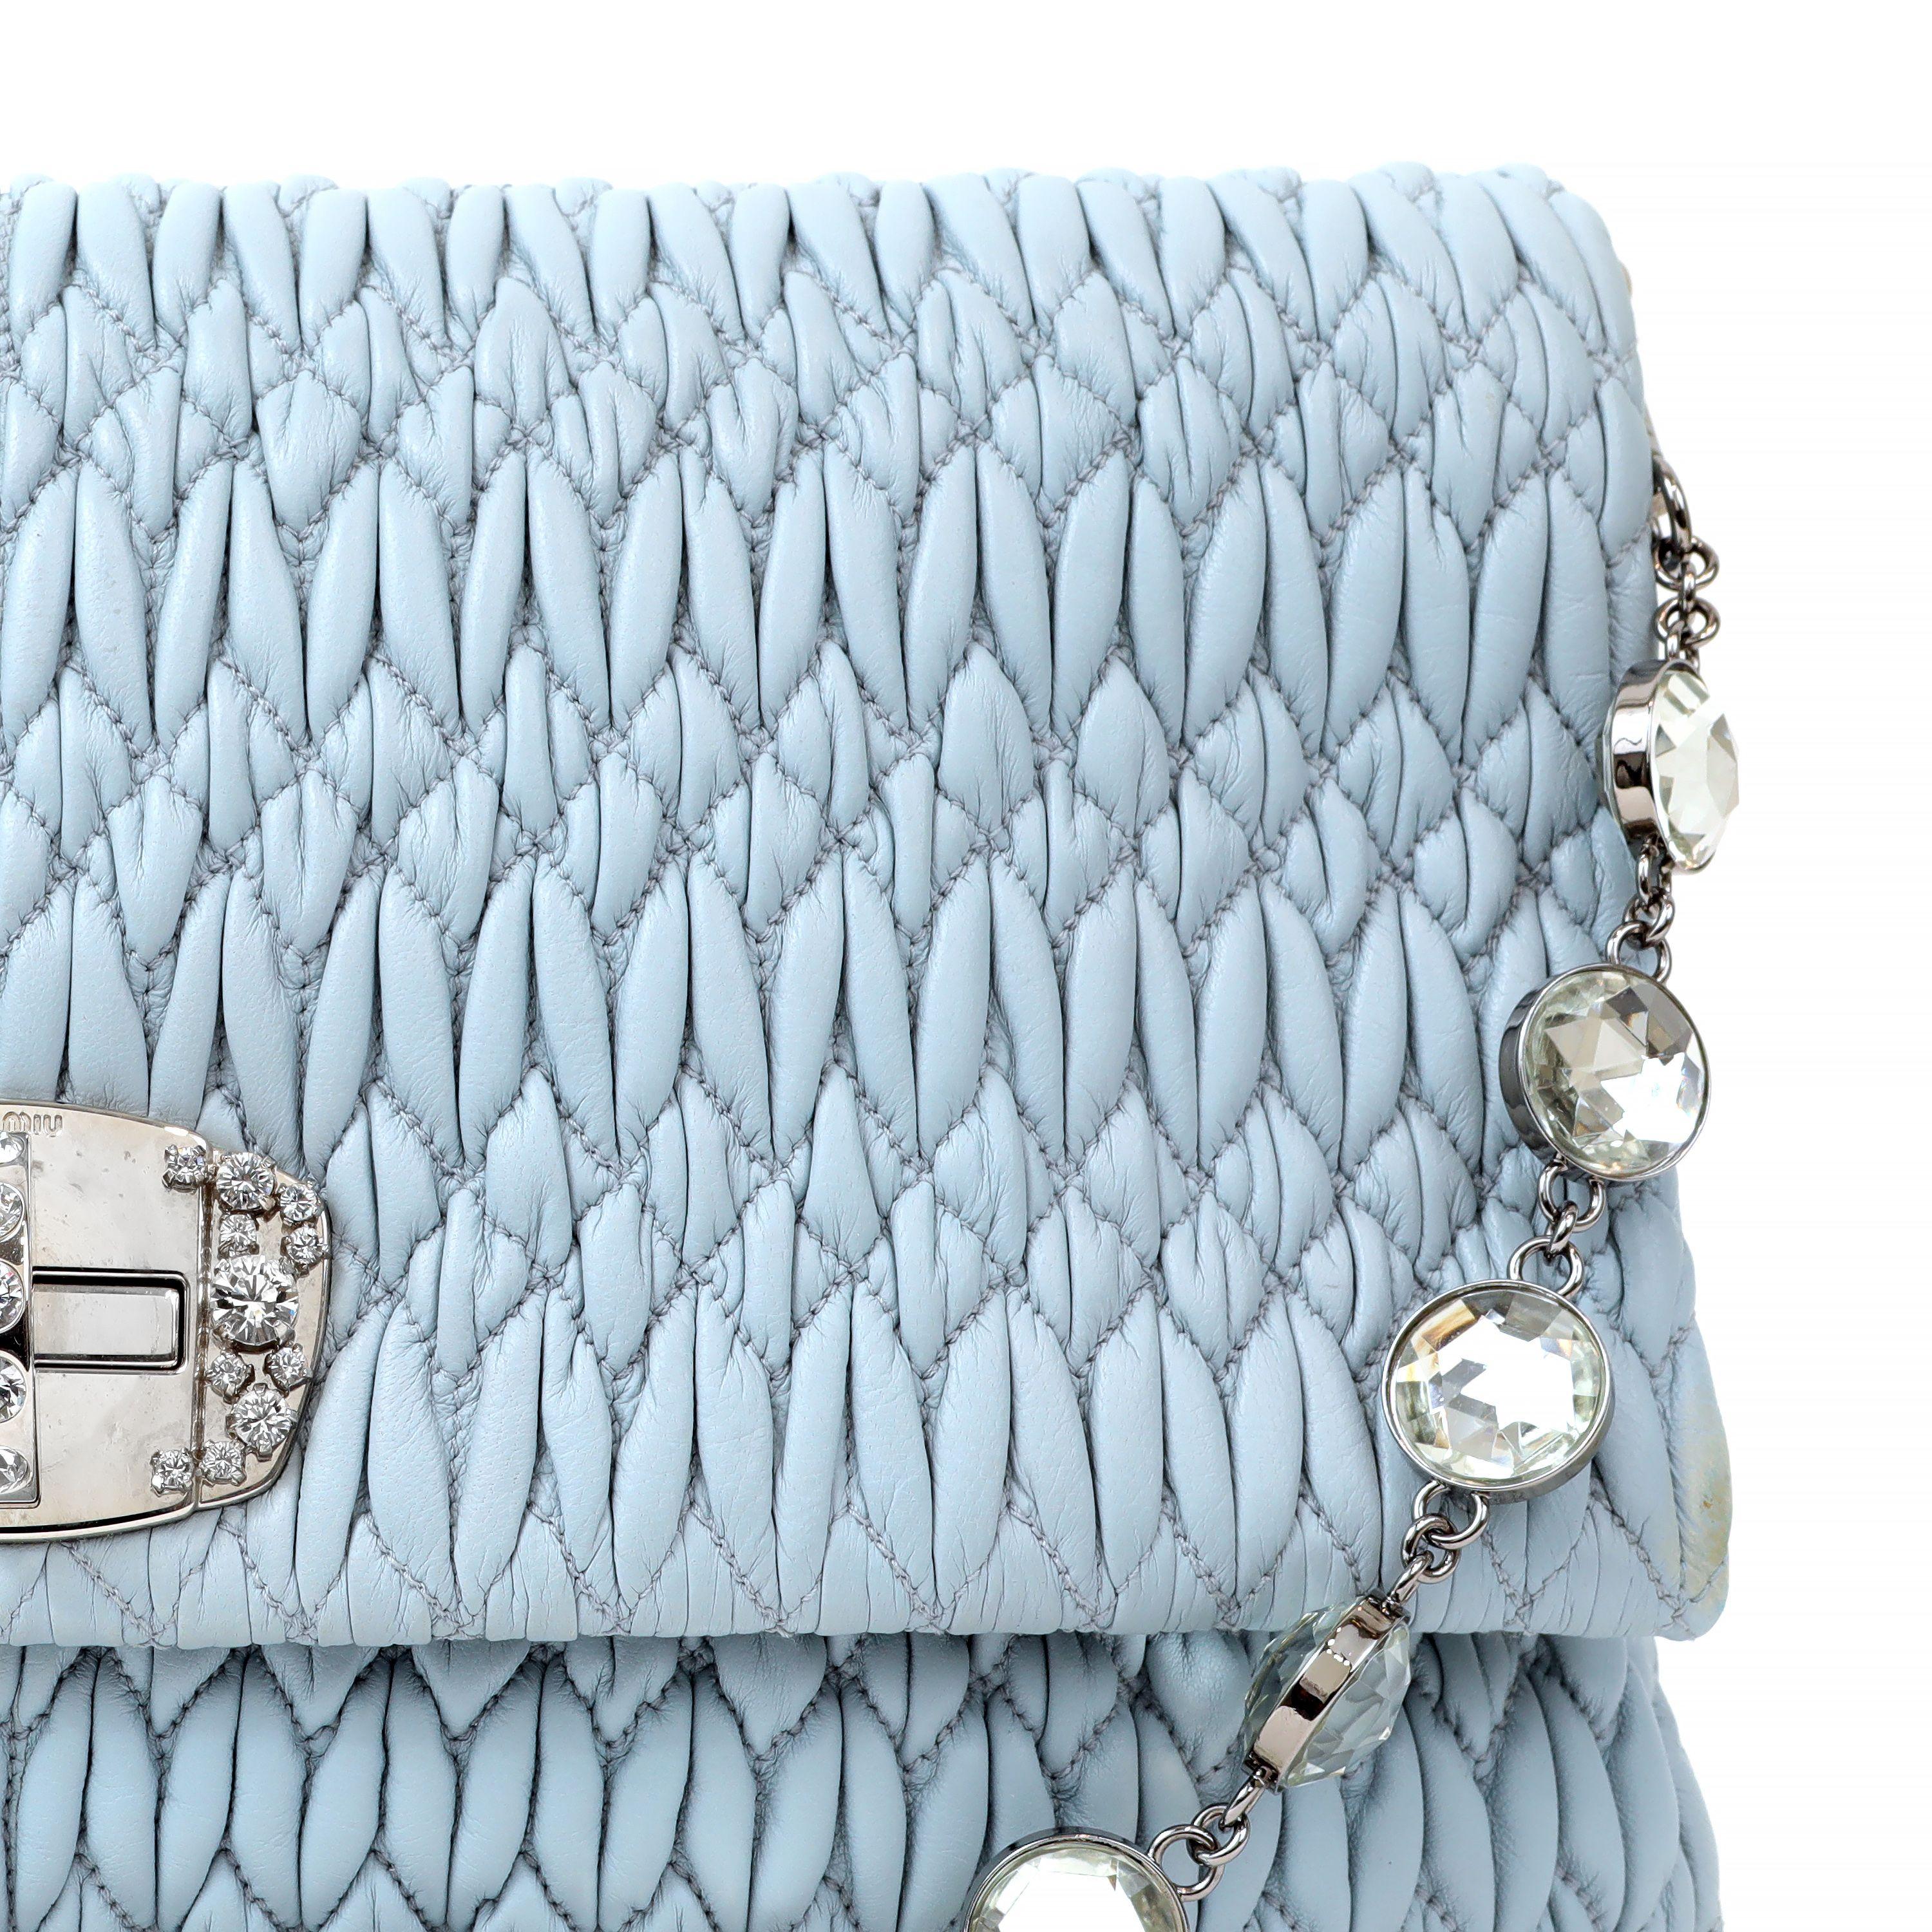 Women's Miu Miu Dusty Blue Iconic Crystal Cloquè Large Bag with Silver Hardware For Sale